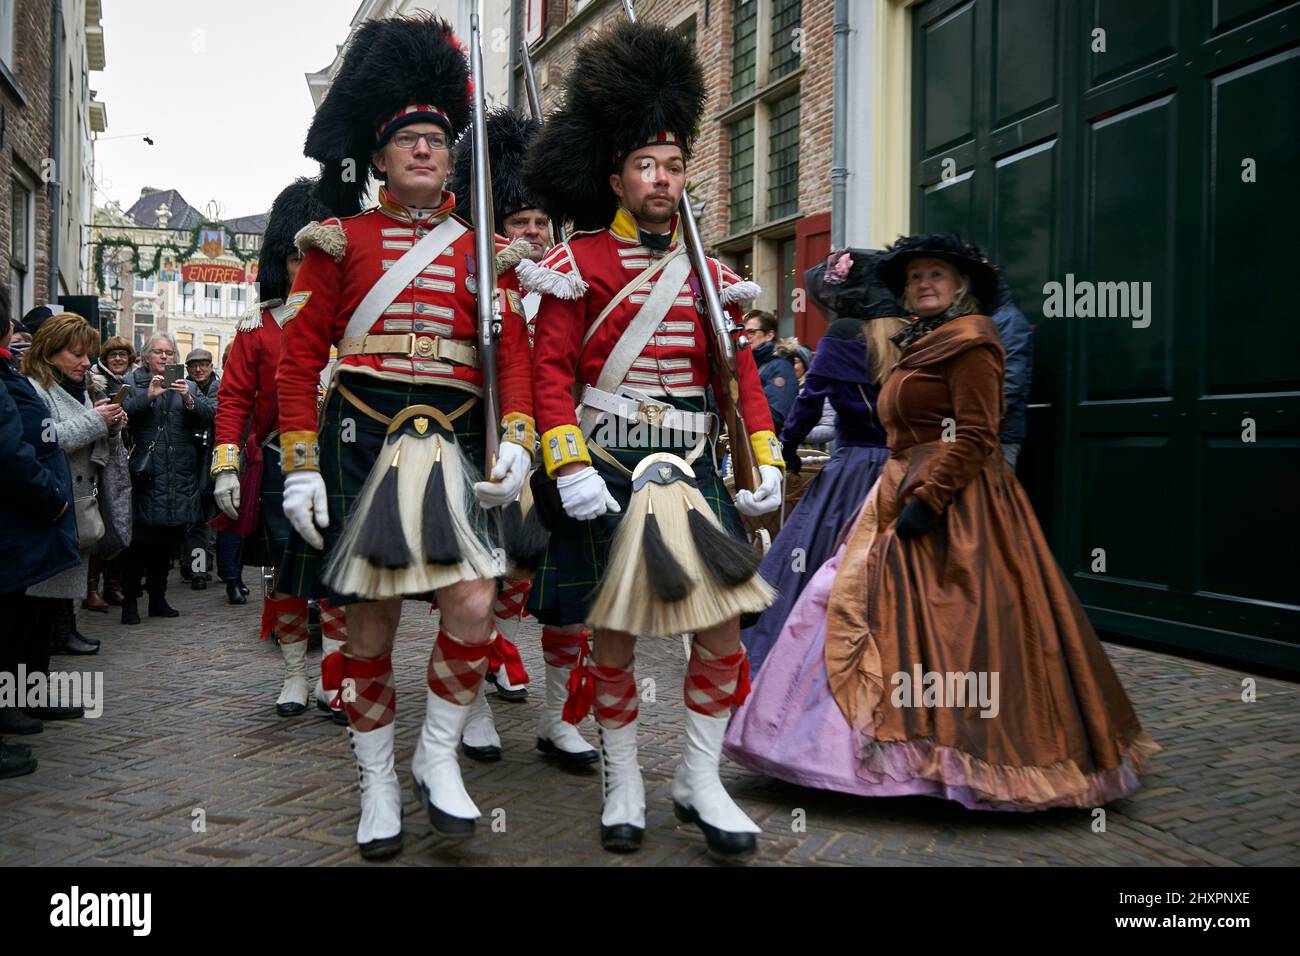 A group of participants parade through the streets of Deventer dressed as British soldiers Stock Photo